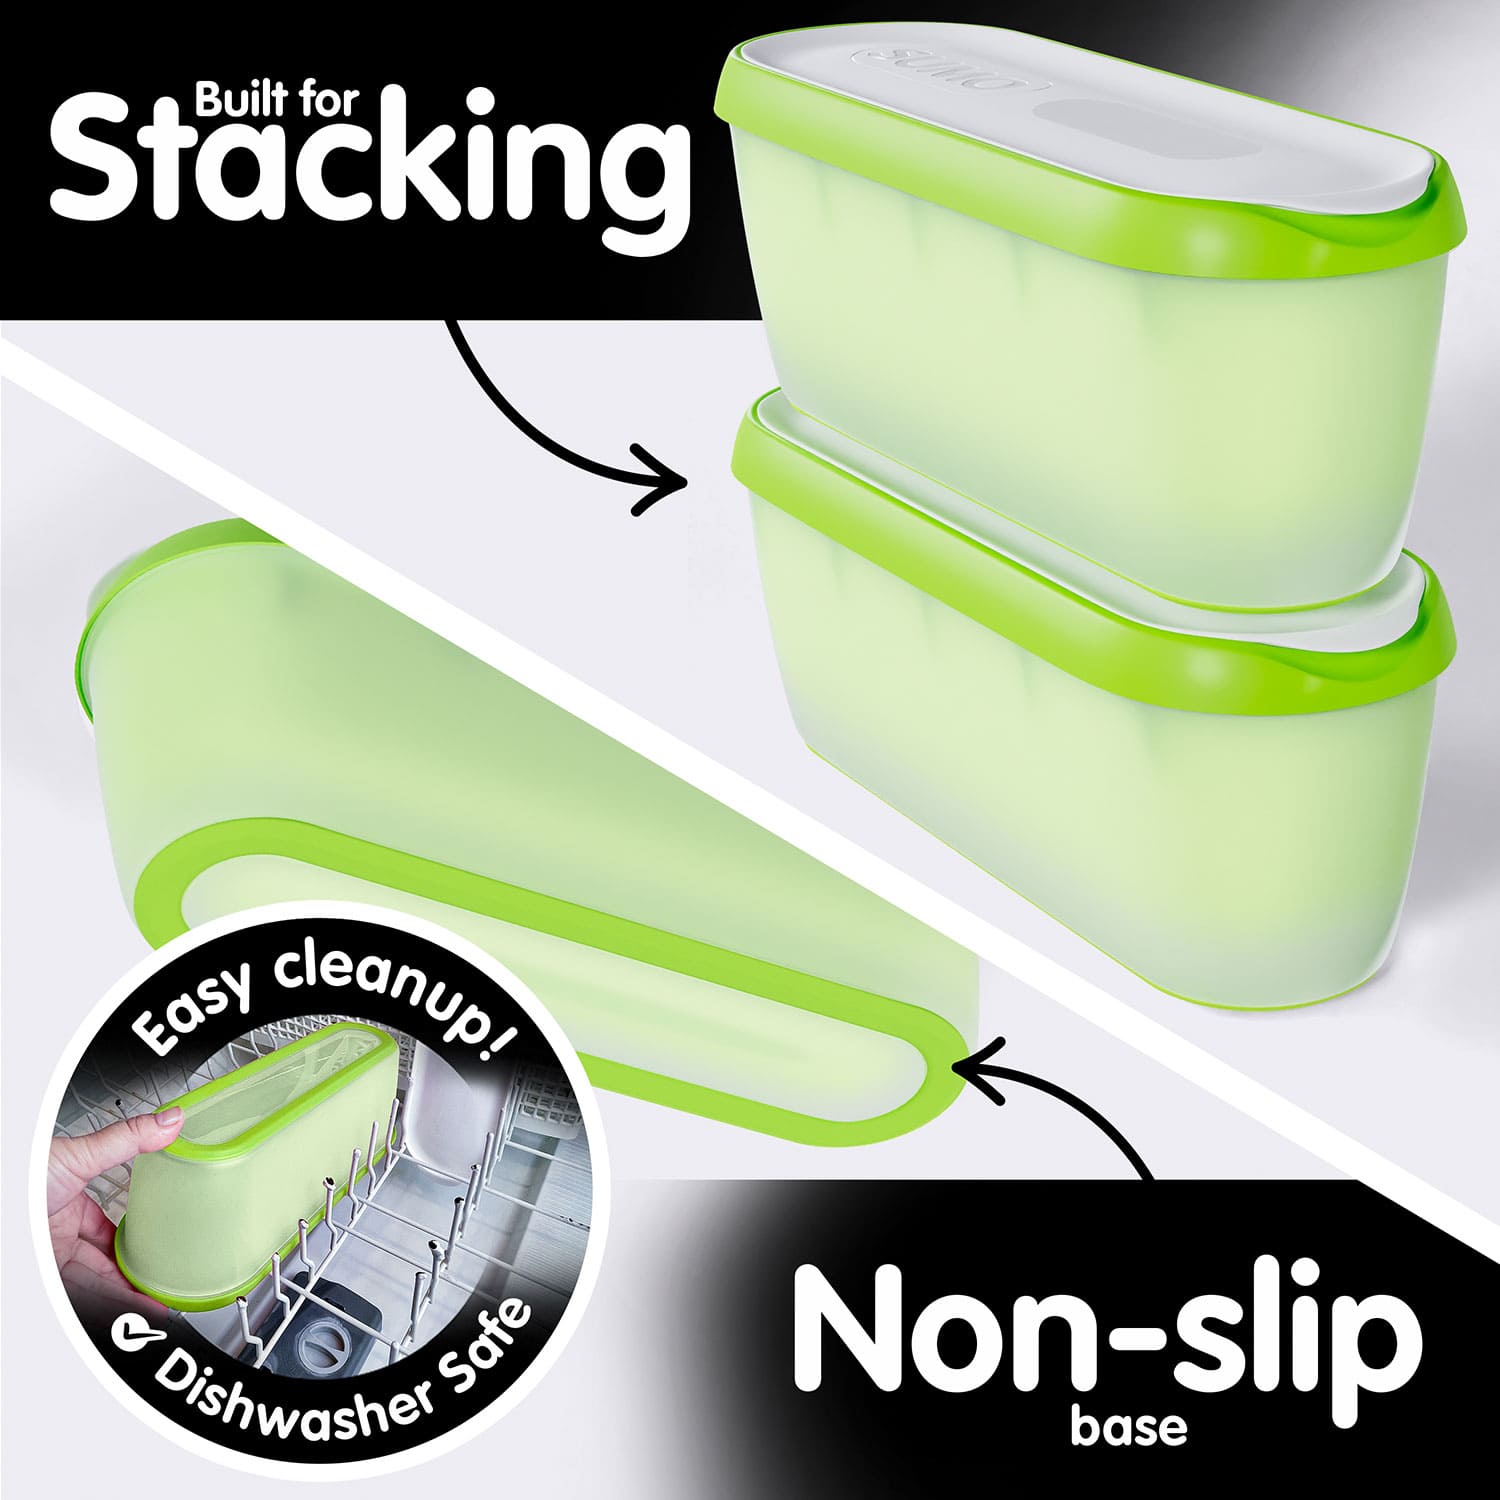 https://sumokitchenware.com/assets/images/products/ice-cream-container/green/5.jpg